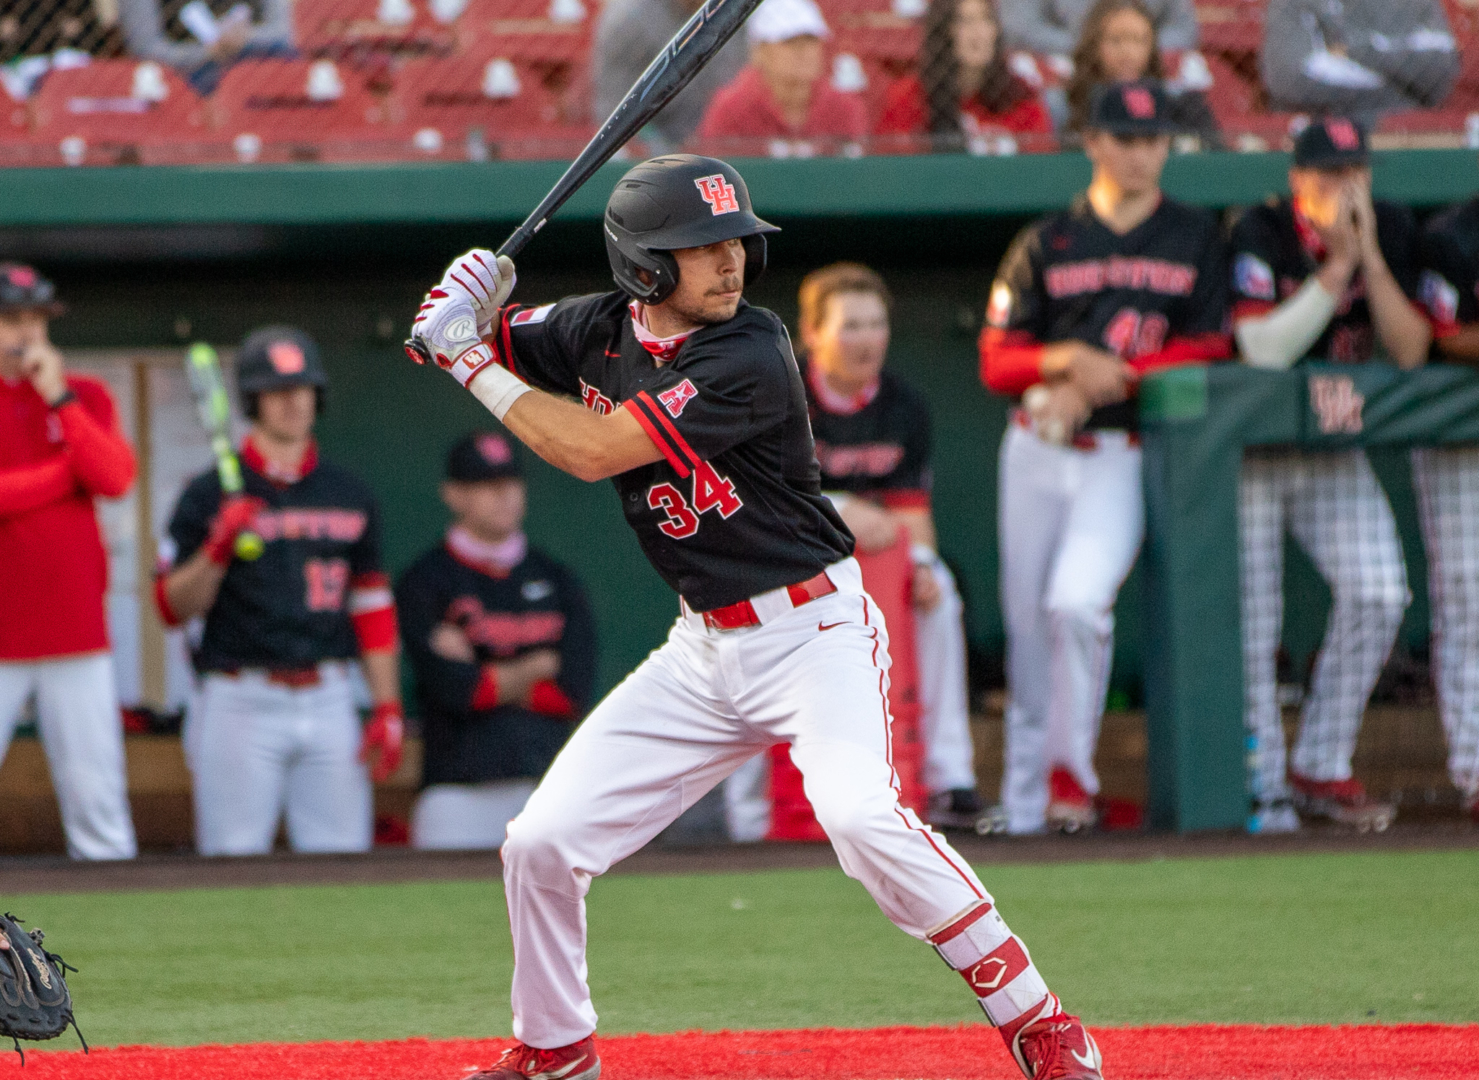 Junior catcher Kyle Lovelace collected two hits and scored three runs in UH baseball's weekend series against Texas State | Andy Yanez/The Cougar